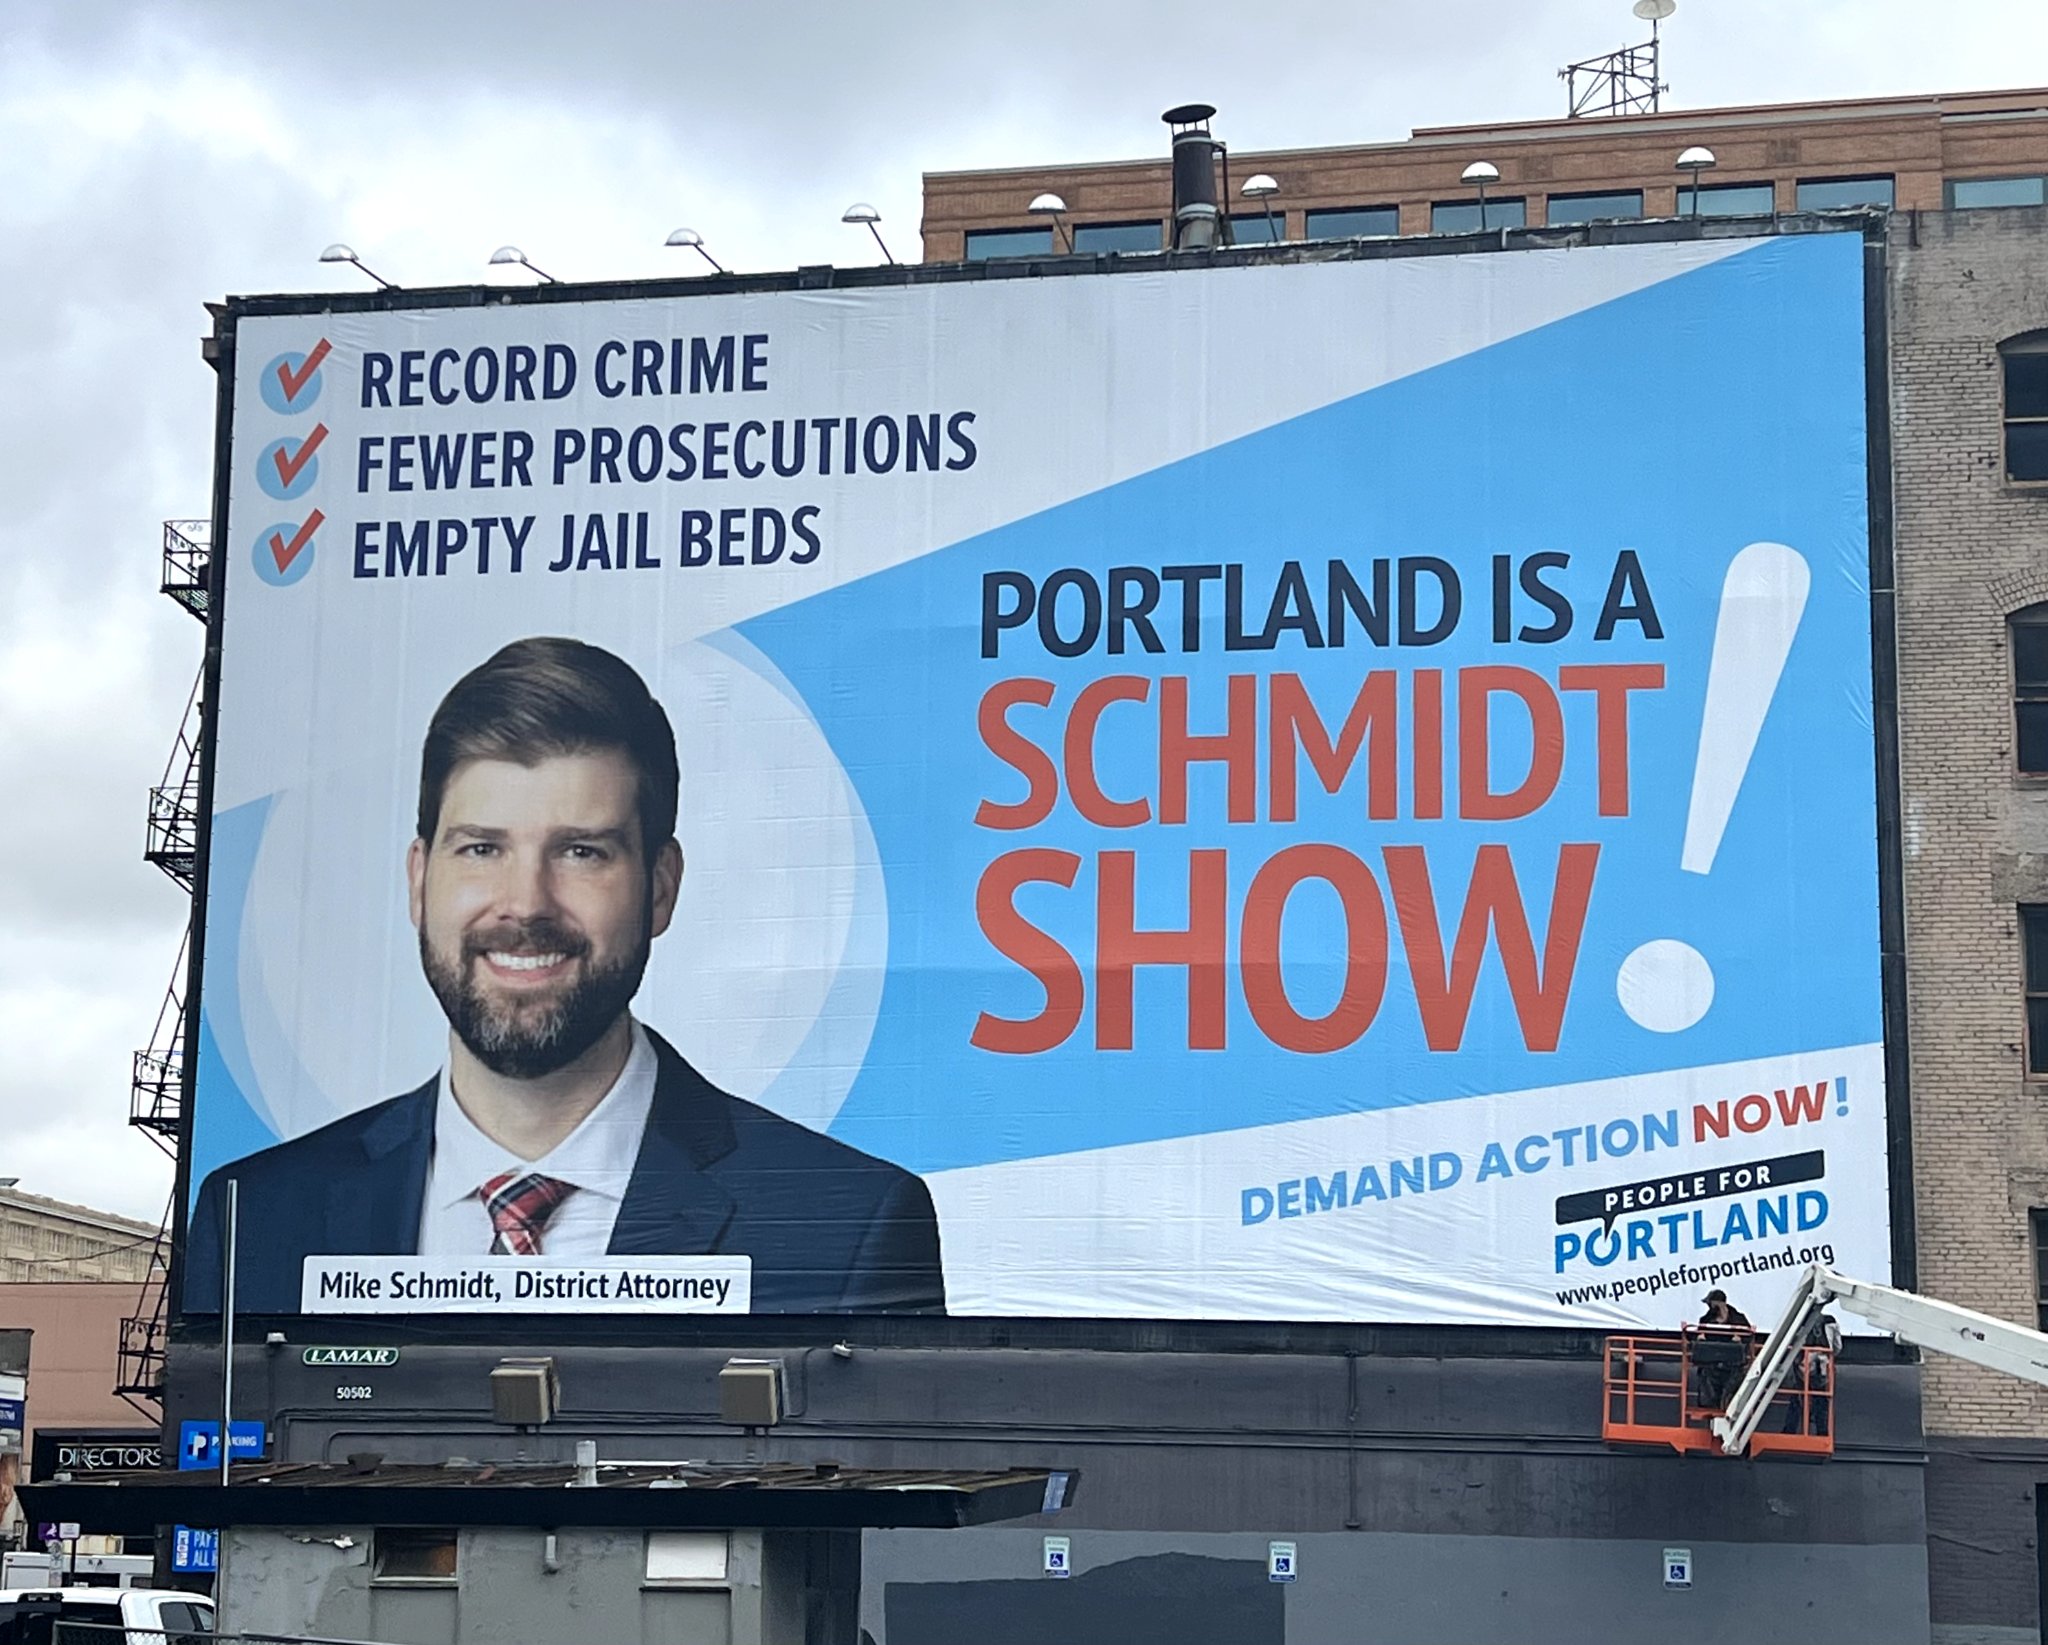 Elliott Young on X: People For Portland is clearly a mass incarceration PR  campaign. If you support them, then you support mass incarceration. Imagine  being so upset about empty jail beds. Record